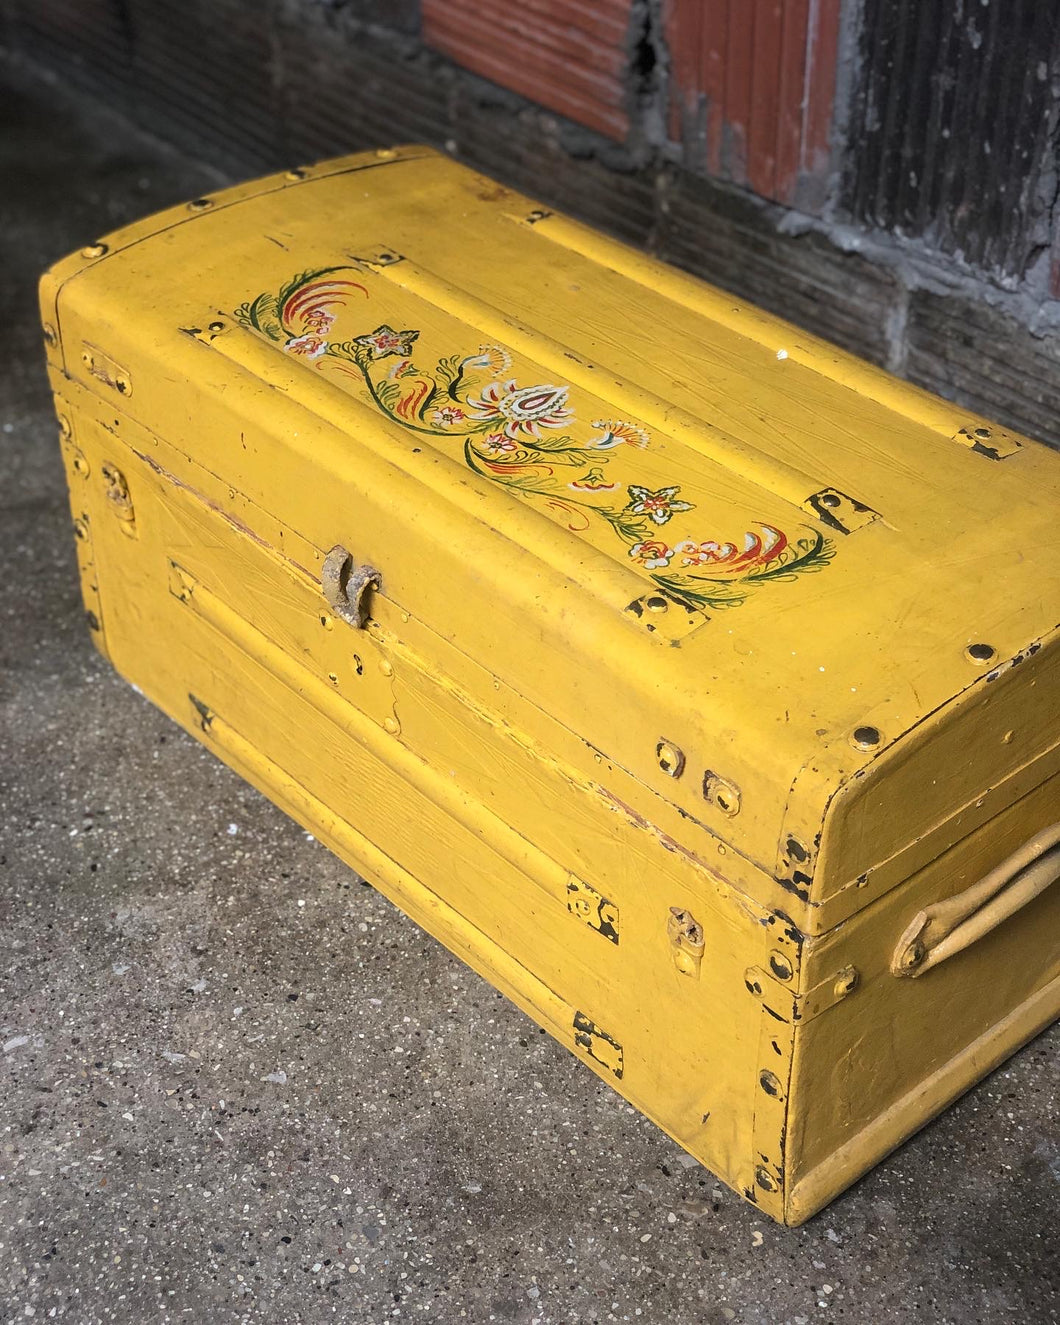 Painted Antique Trunk